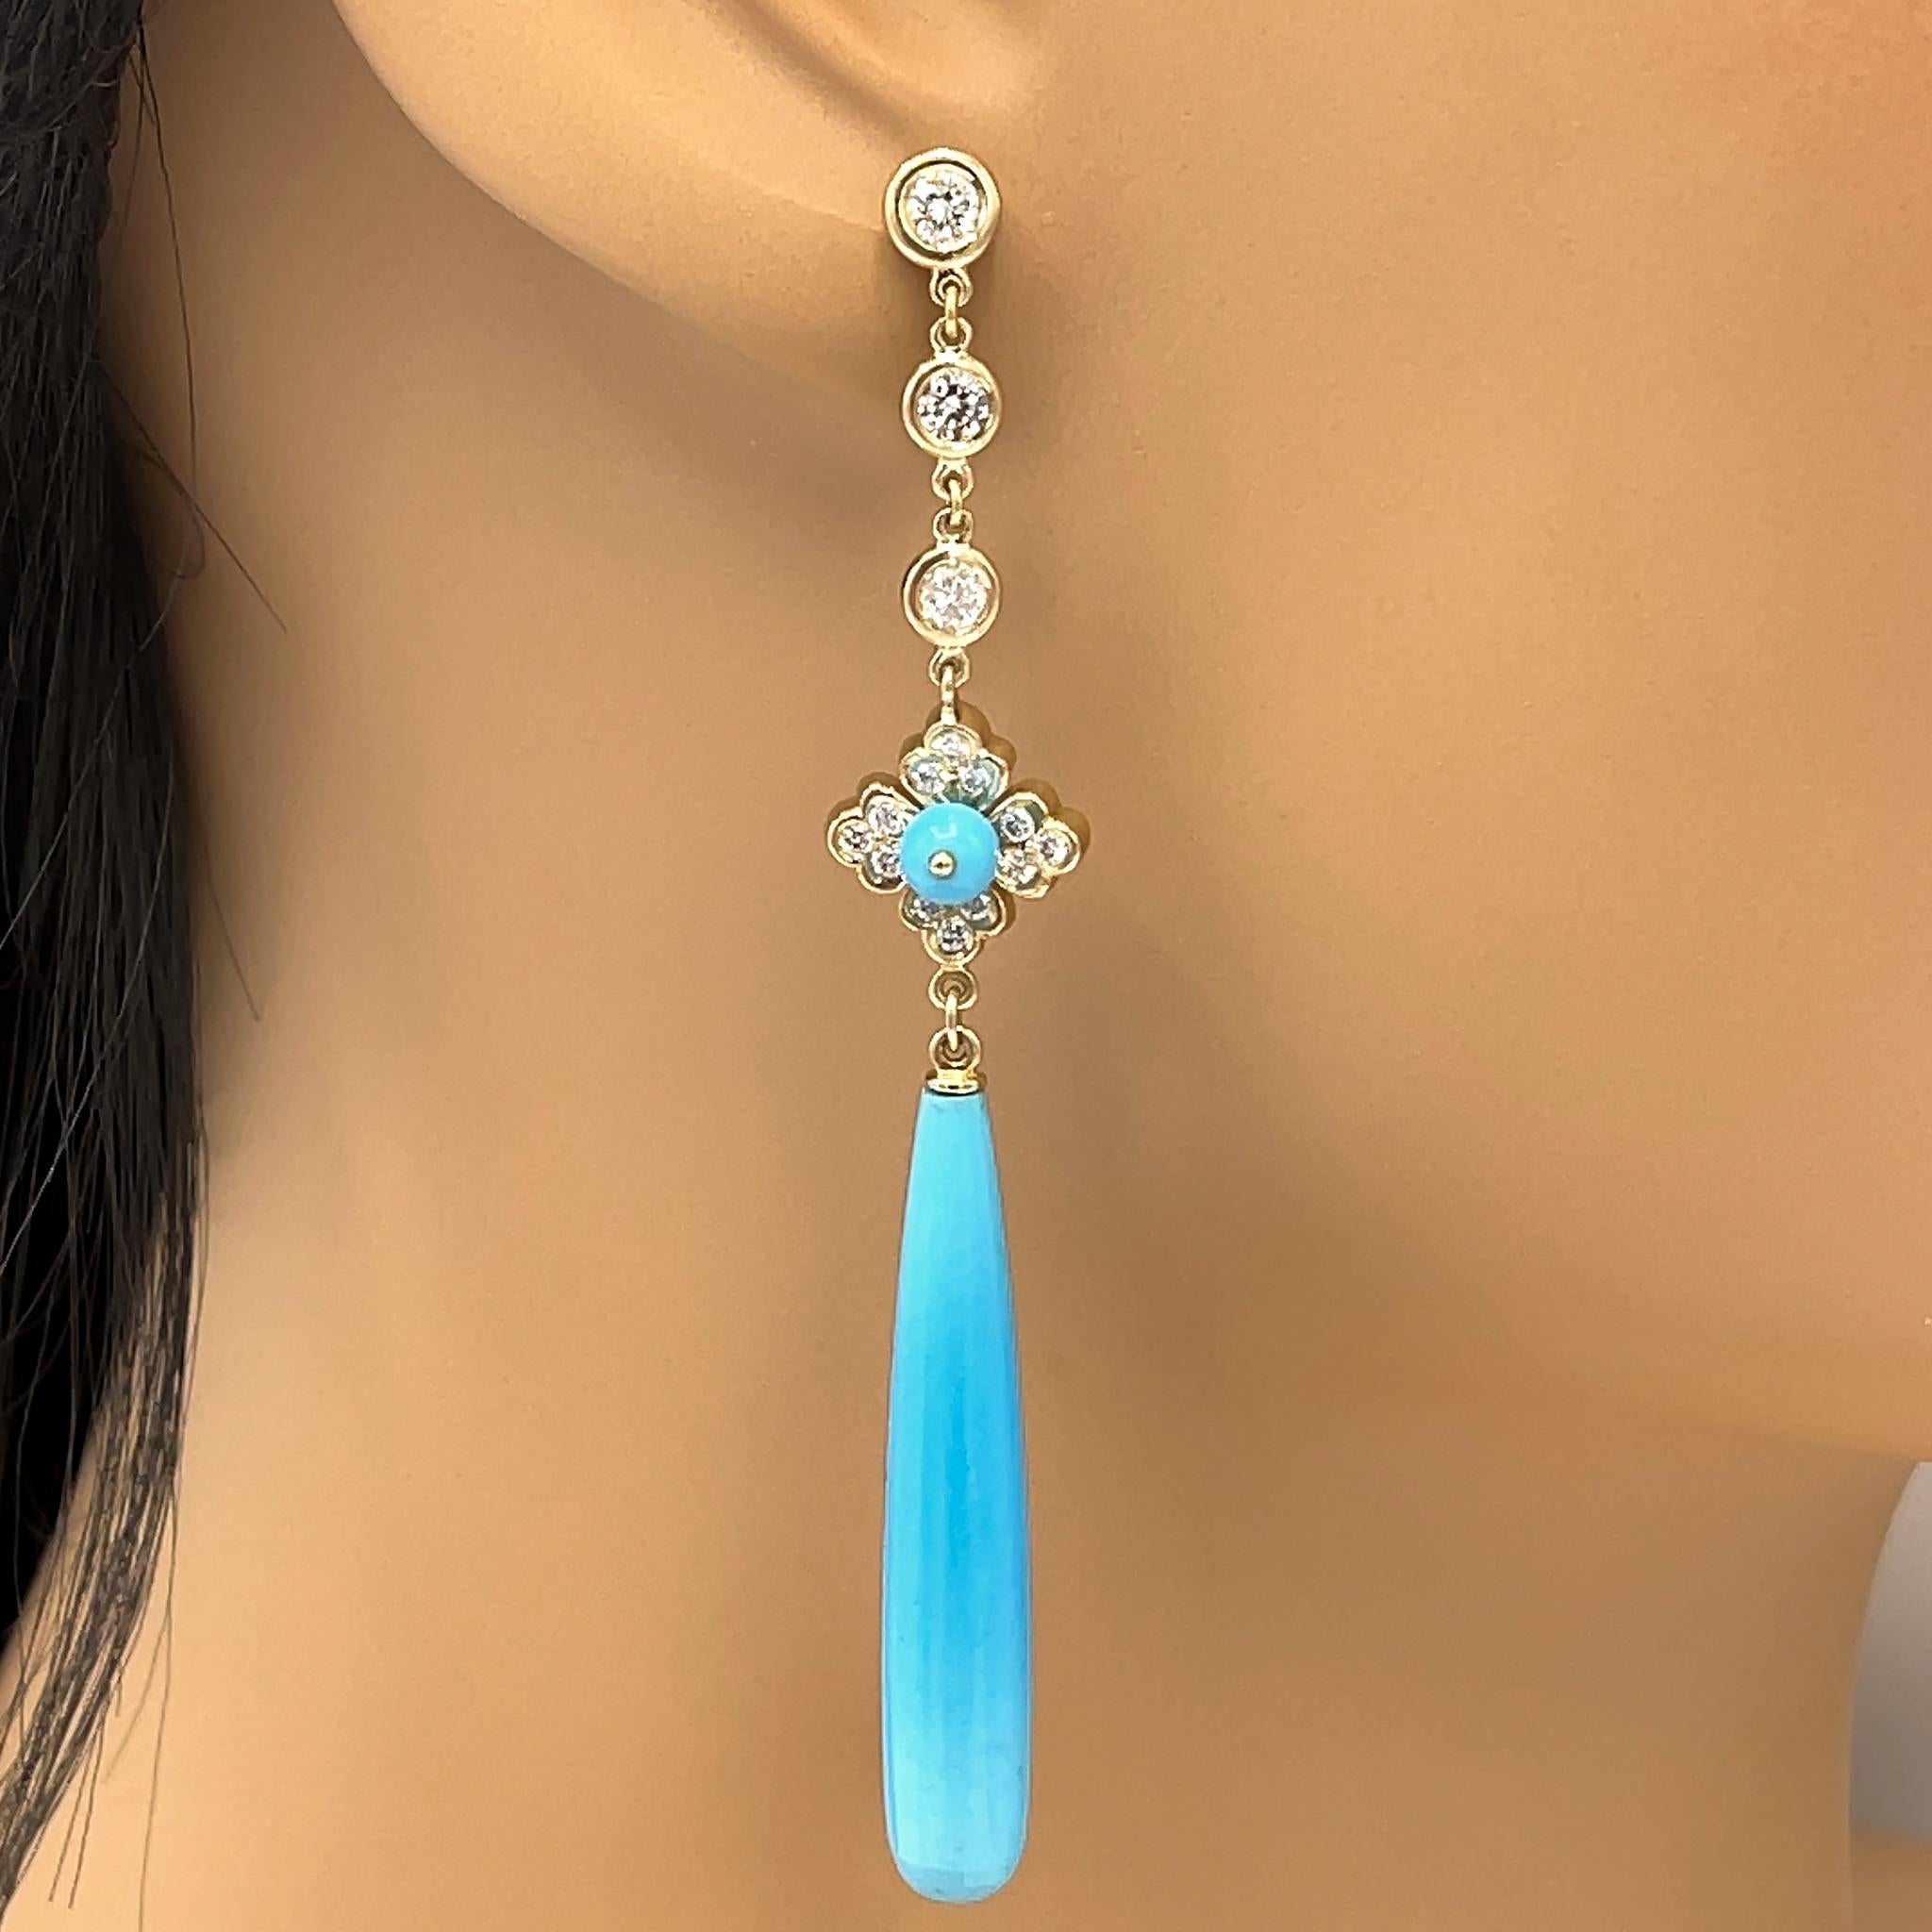 Sleeping Beauty Turquoise is revered and highly sought after due to its pure sky blue color.  It is a fantastic gift for anyone who adores fine jewelry especially this holiday season.
18 kt Yellow Gold
Sleeping Beauty Turquoise: 28.40 tcw
Diamond: